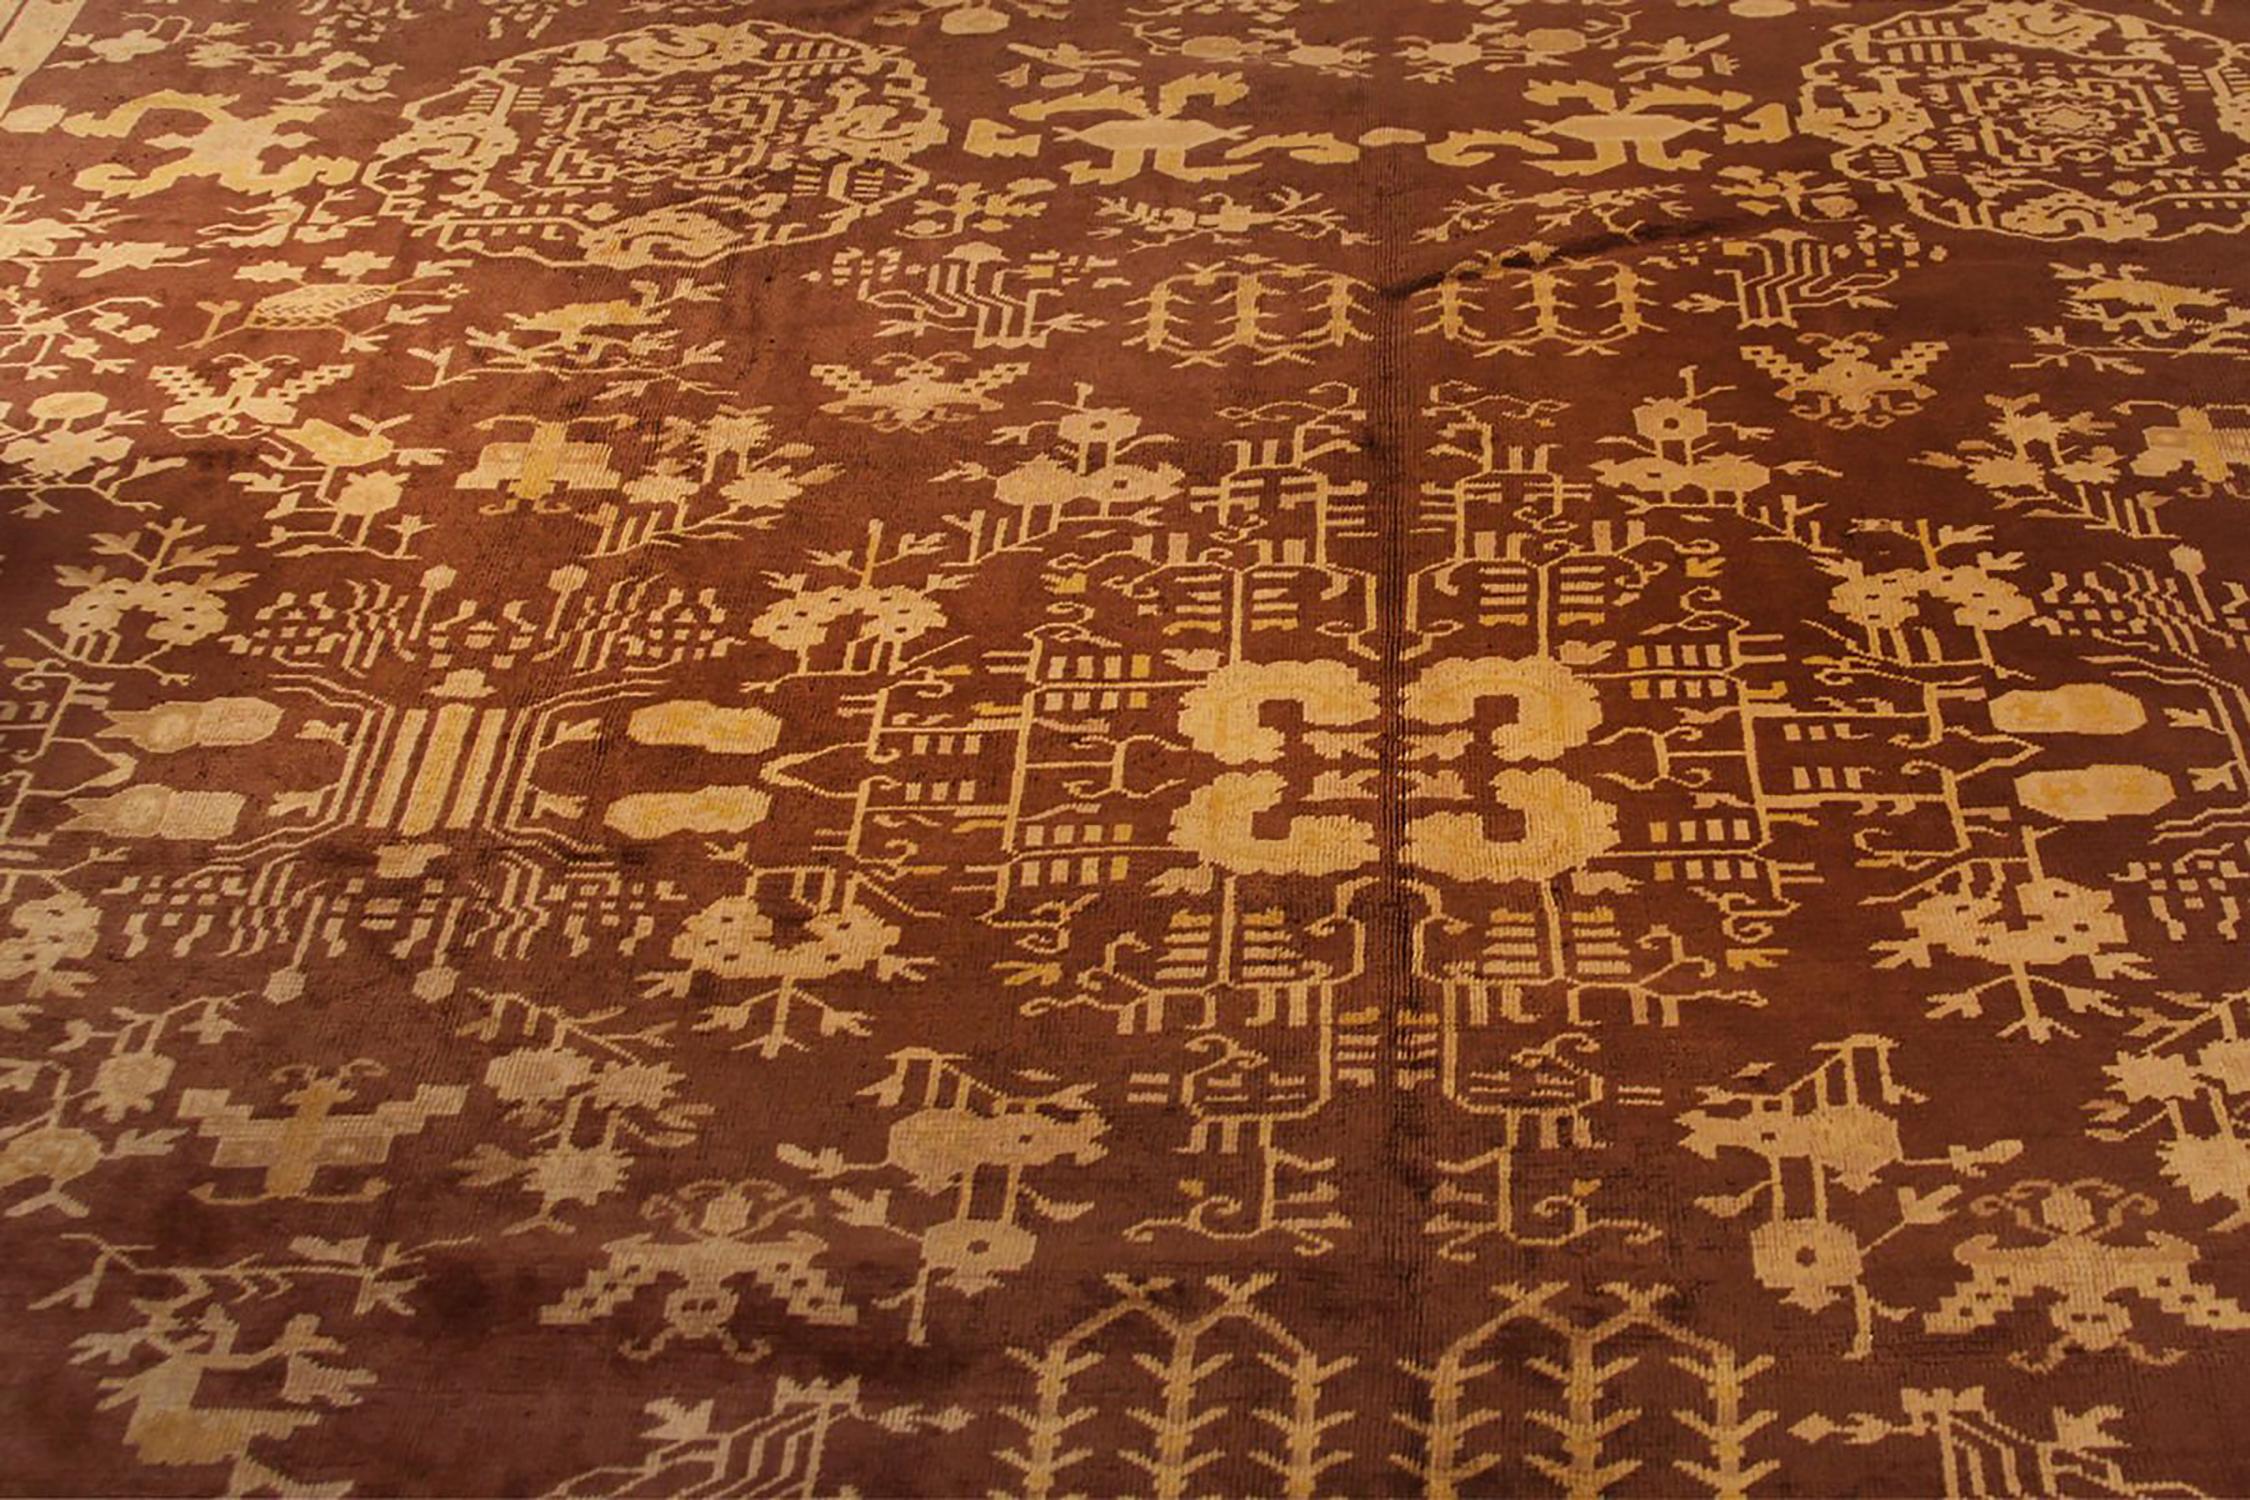 Hand knotted in wool originating from East Turkestan circa 1910-1920, this antique rug is a rare 12 x 16 Khotan rug seldom seen in both this magnificent scale and rich beige brown colorway hues. 

On the design: The atypical approach to scale